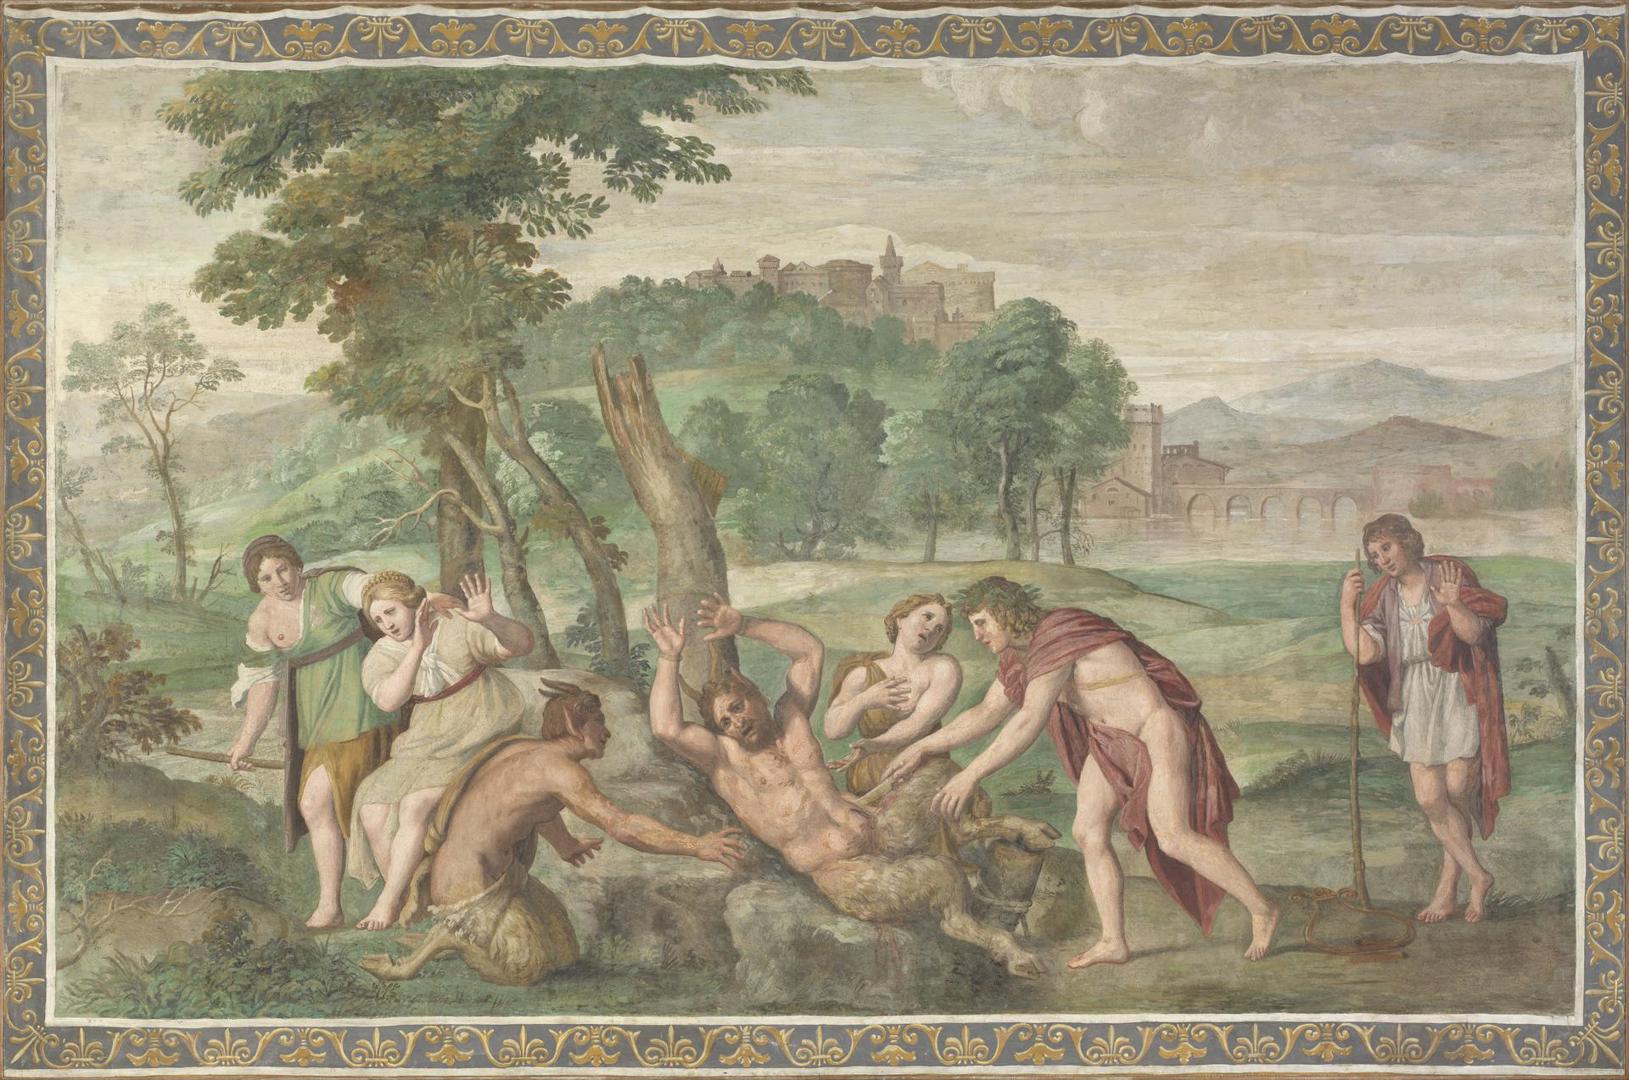 The Flaying of Marsyas by Domenichino and assistants